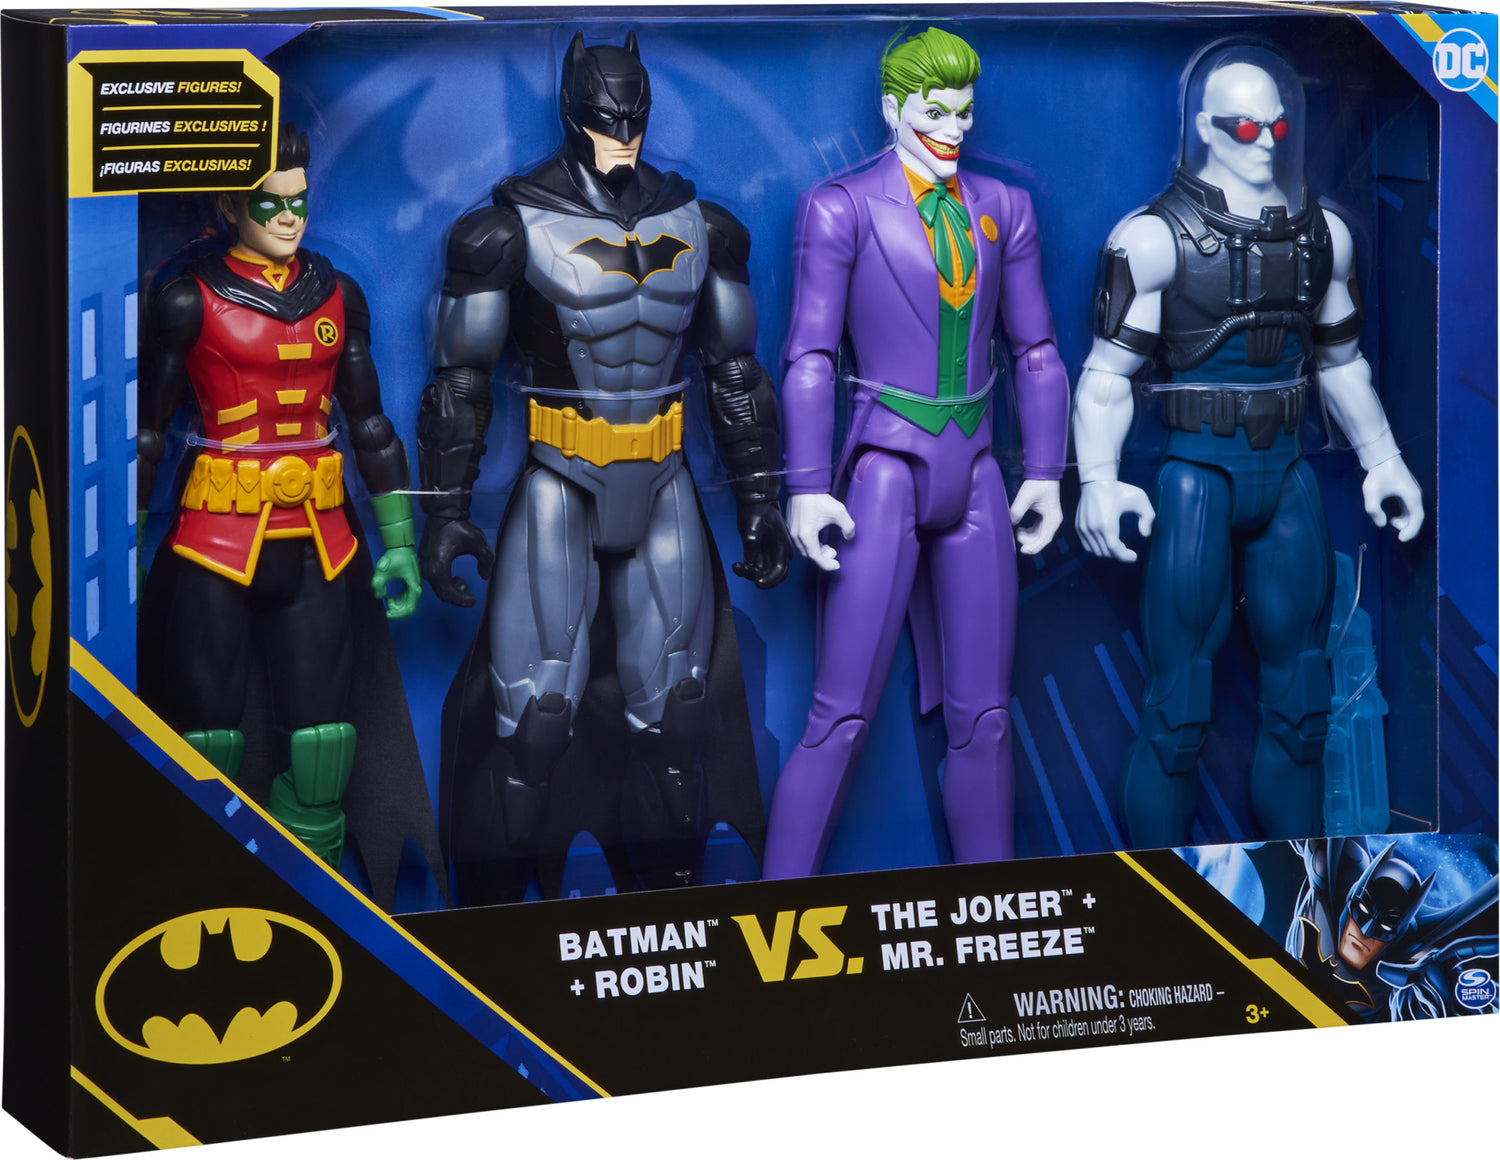 Batman and Robin vs. The Joker and Mr. Freeze 12-inch Action Figures